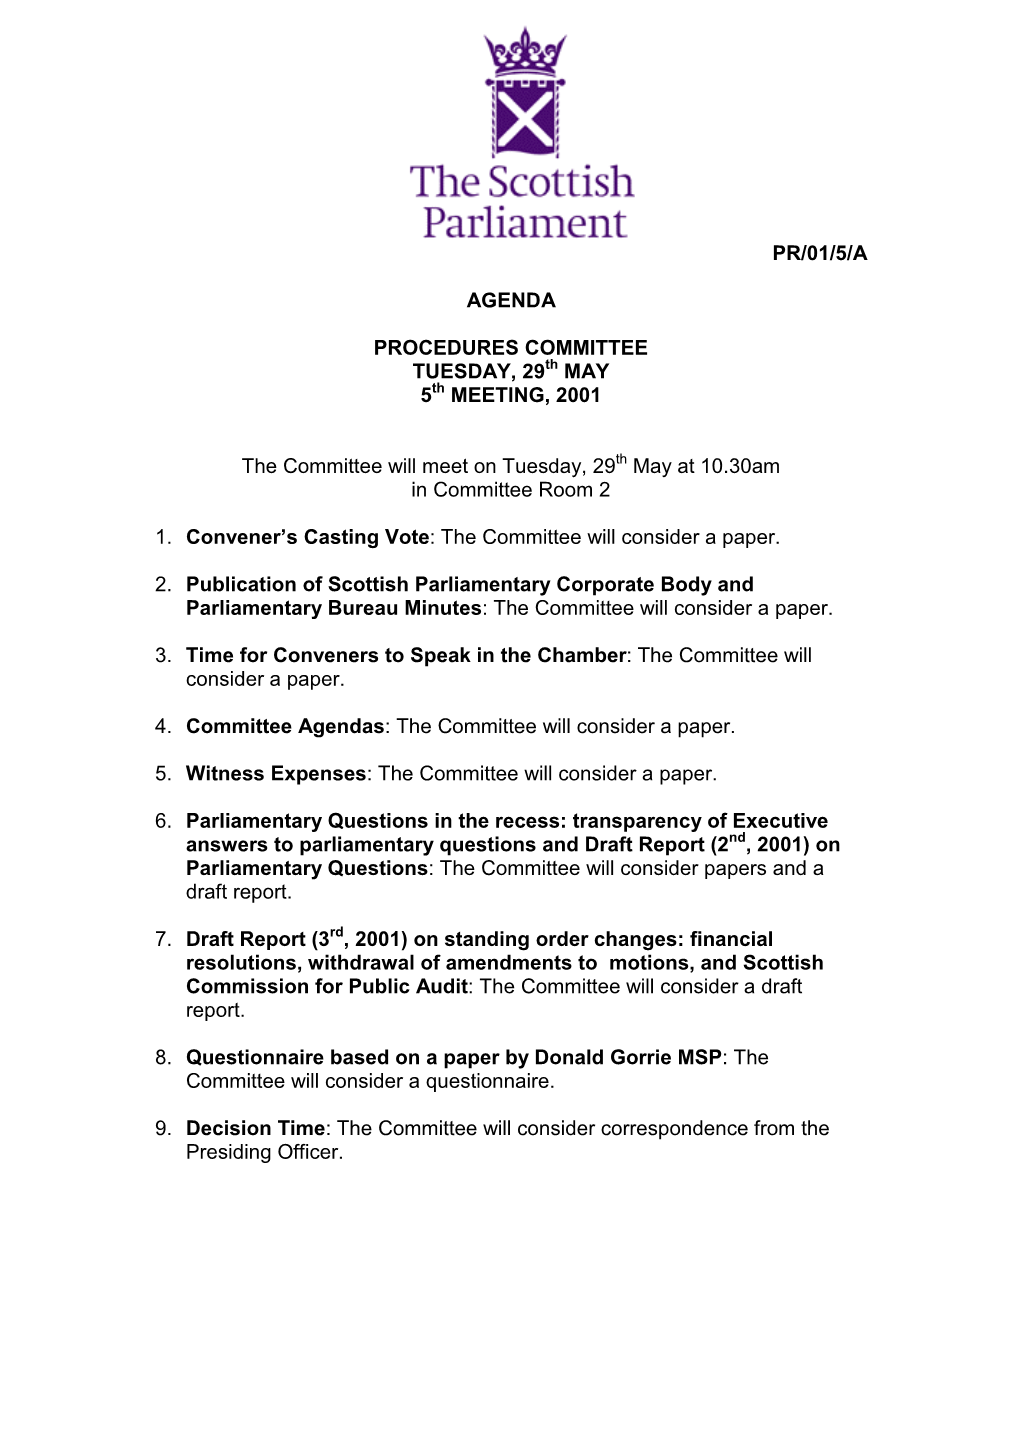 PR/01/5/A AGENDA PROCEDURES COMMITTEE TUESDAY, 29 MAY 5 MEETING, 2001 the Committee Will Meet on Tuesday, 29 May at 10.30Am in C